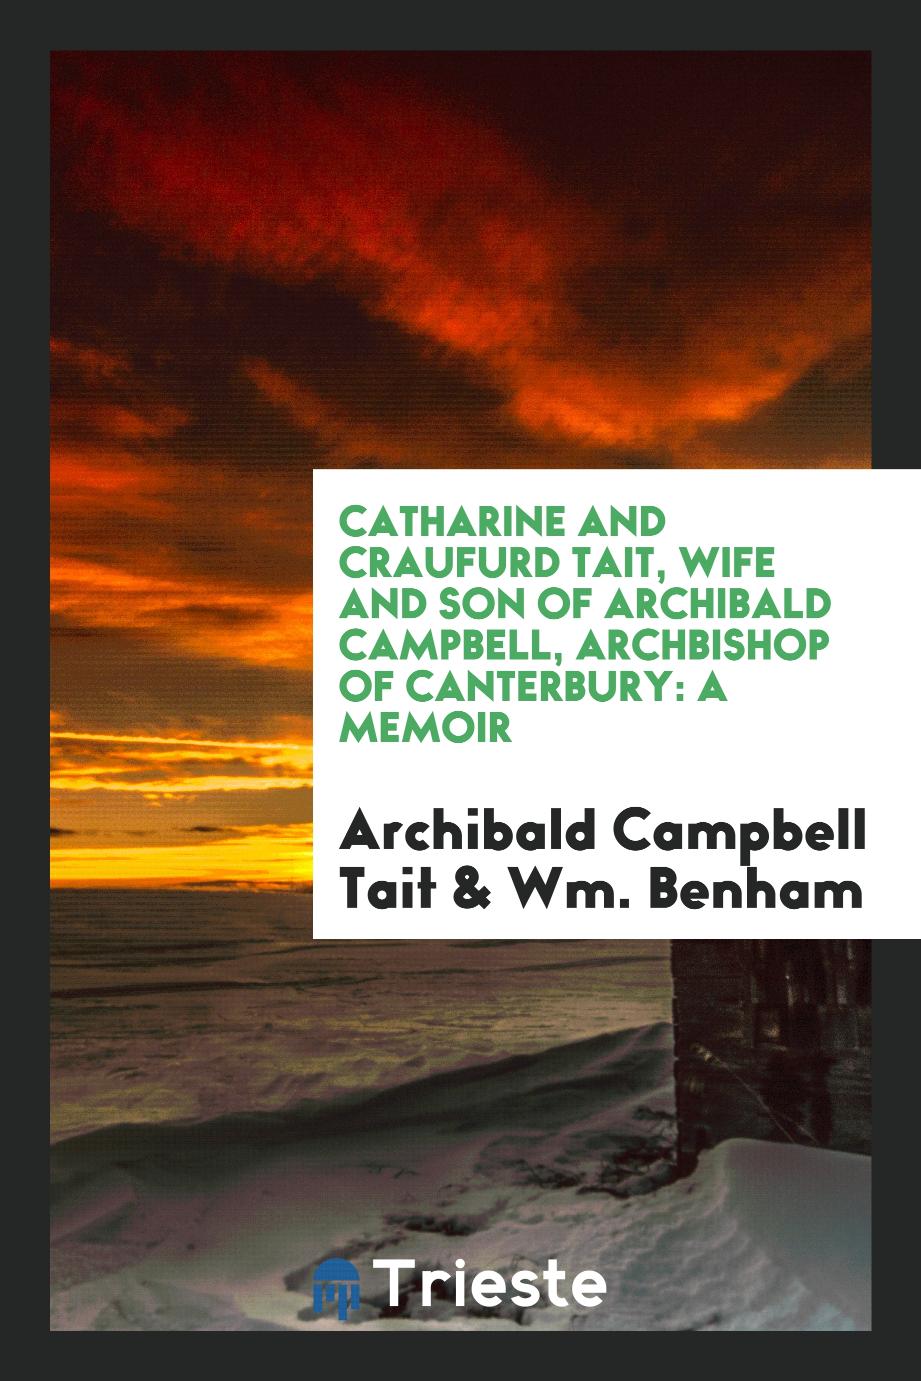 Catharine and Craufurd Tait, Wife and Son of Archibald Campbell, Archbishop of Canterbury: A Memoir